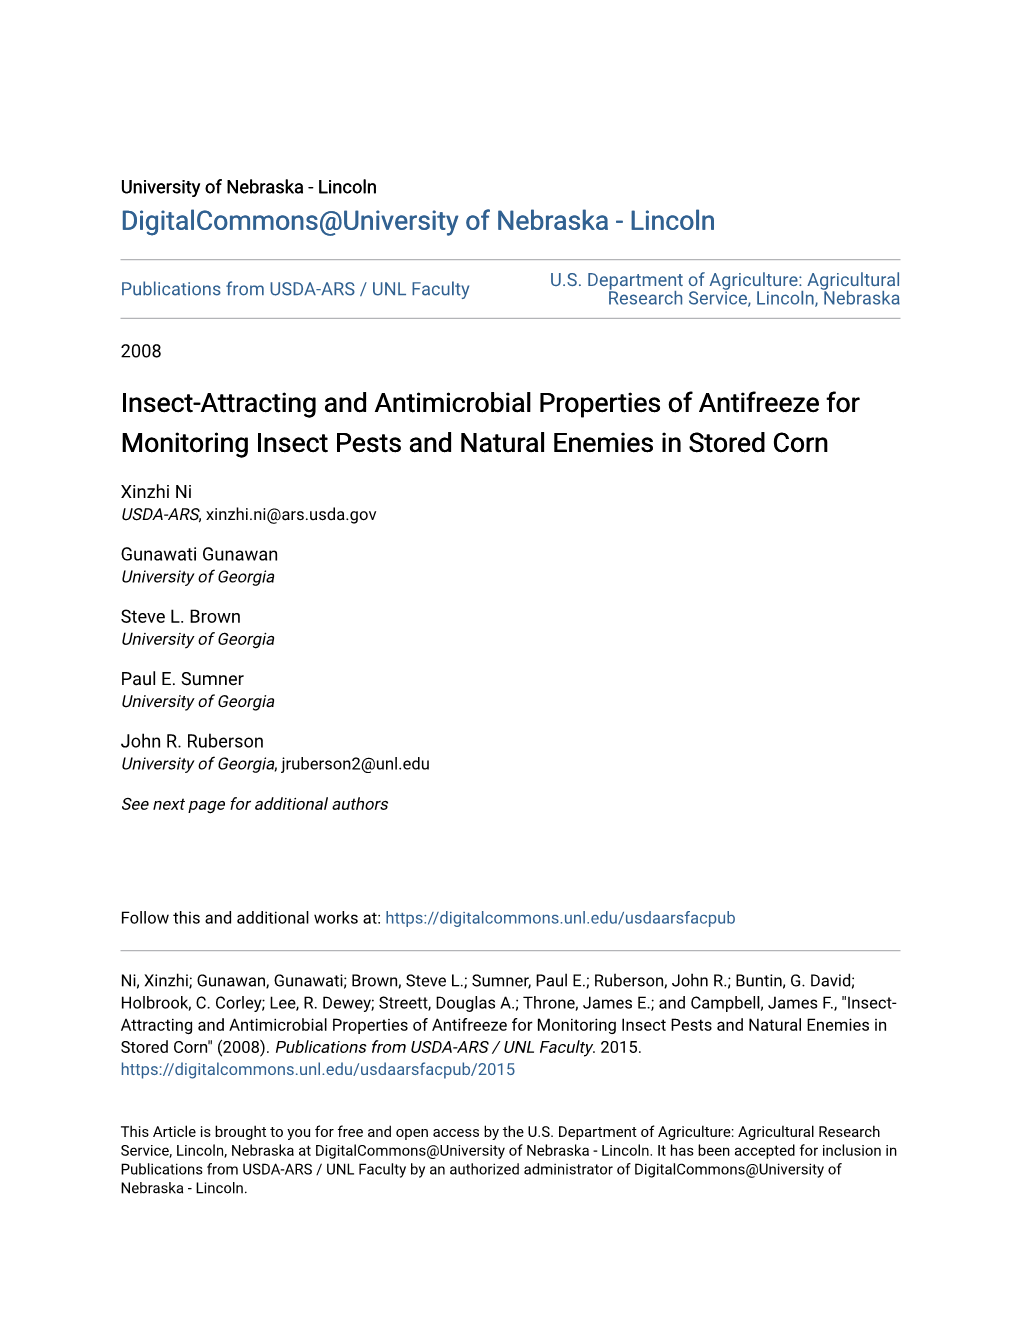 Insect-Attracting and Antimicrobial Properties of Antifreeze for Monitoring Insect Pests and Natural Enemies in Stored Corn